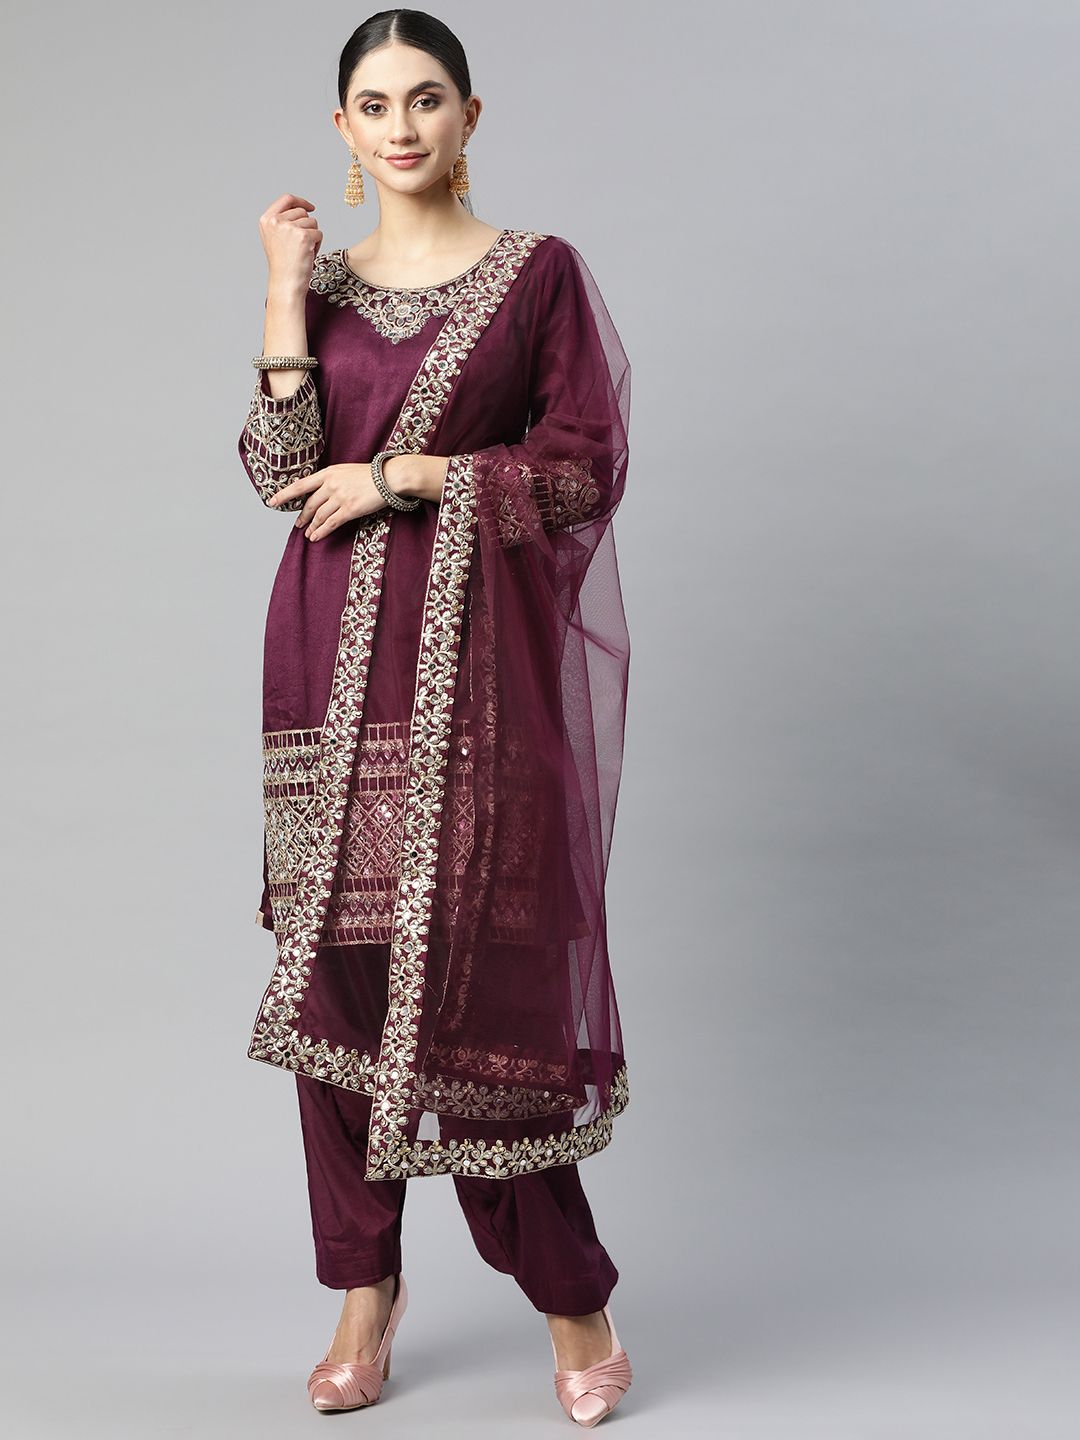 Readiprint Fashions Women Burgundy Embroidered Art Silk Semi-Stitched Dress Material Price in India